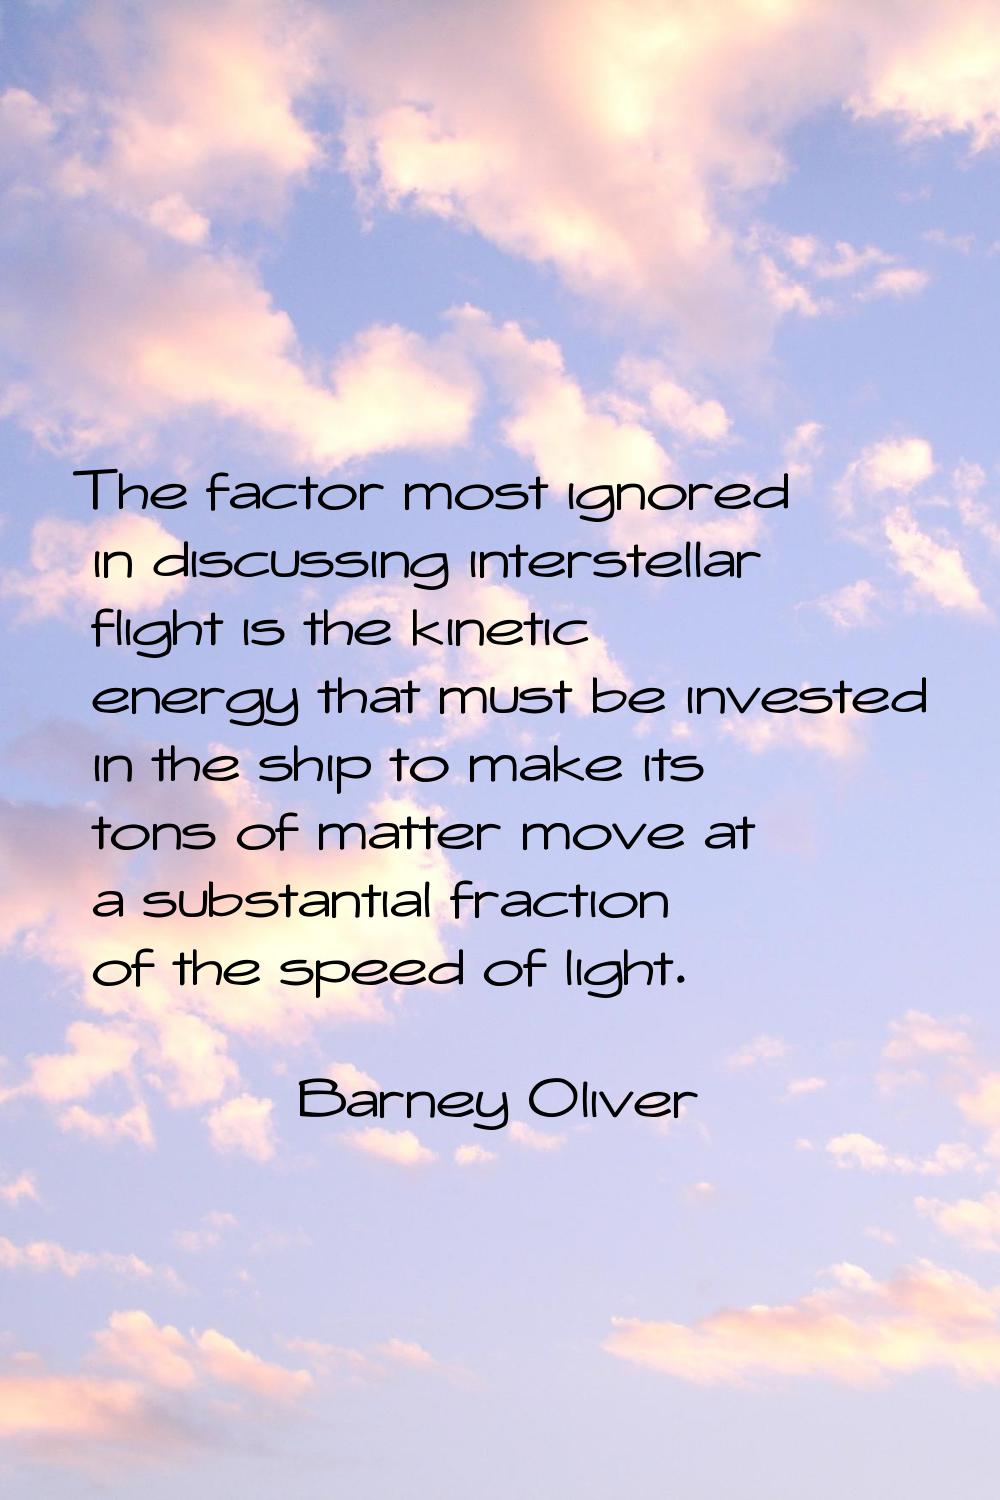 The factor most ignored in discussing interstellar flight is the kinetic energy that must be invest